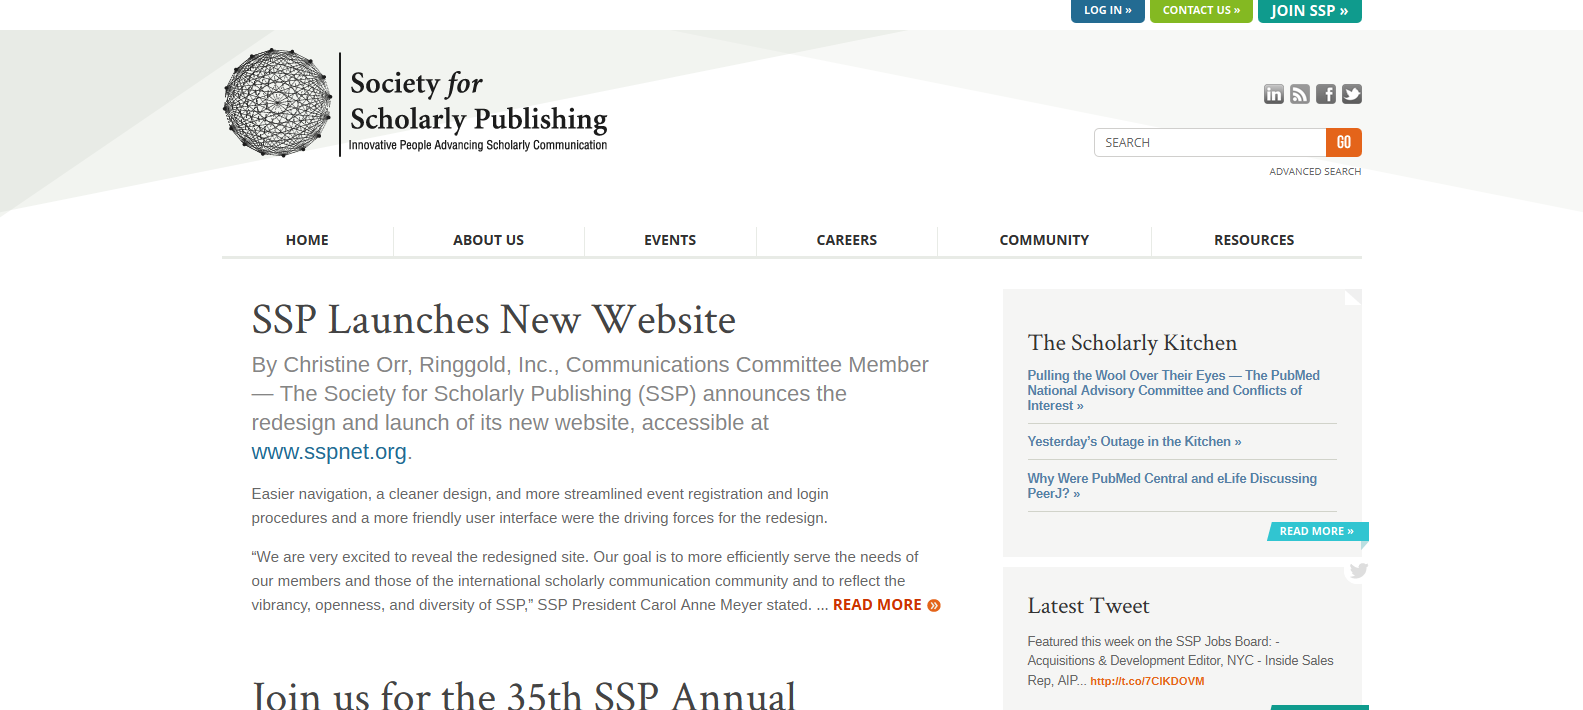 FireShot Screen Capture #001 - 'Society for Scholarly Publishing' - www_sspnet_org